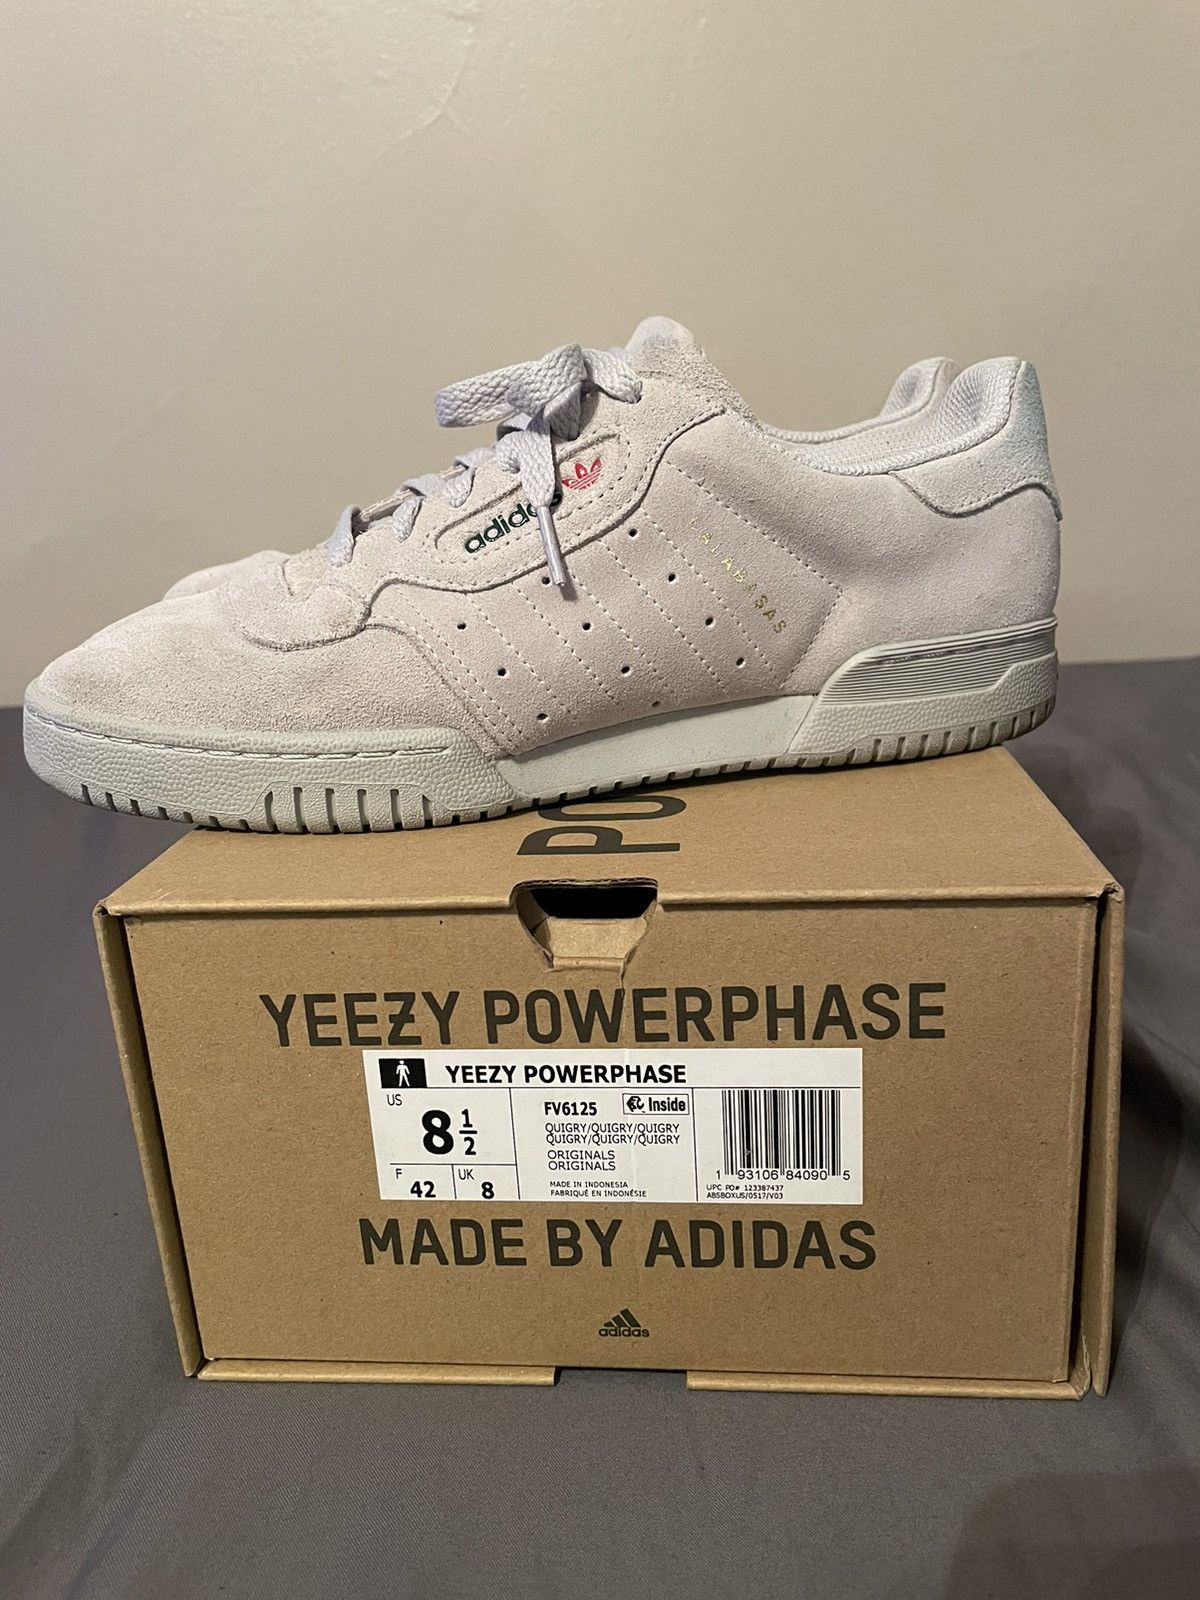 Pre-owned Adidas X Kanye West Adidas Yeezy Powerphase Quiet Grey Size 8.5 Shoes